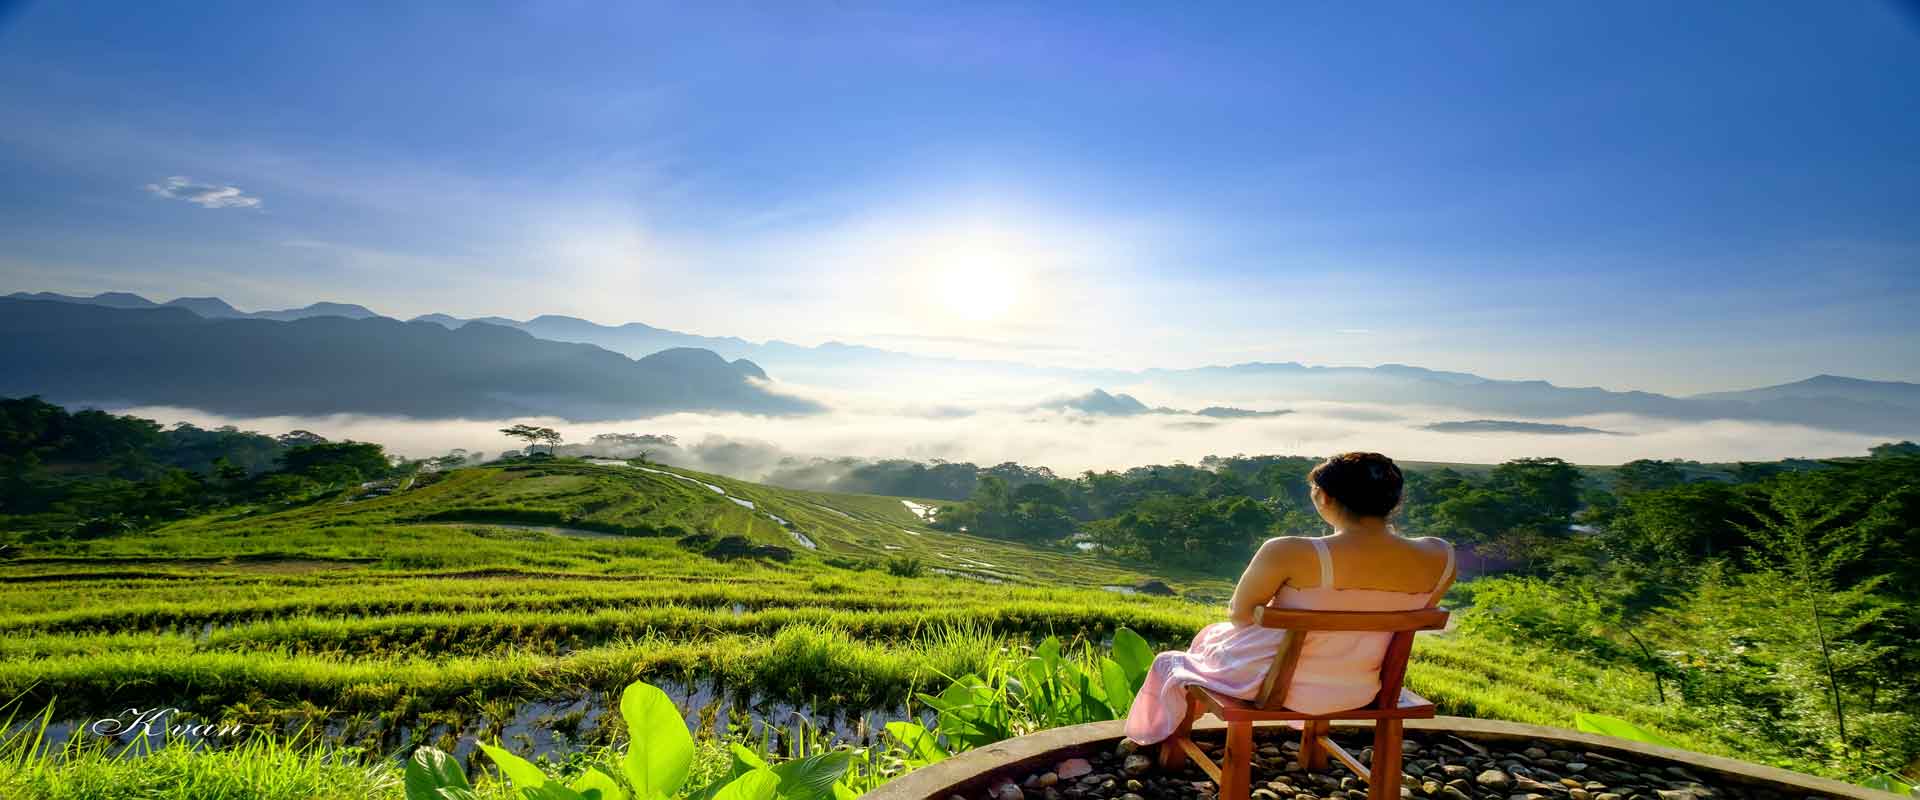 Vietnam Budget Tours: Travel More, Spend Less with Threeland